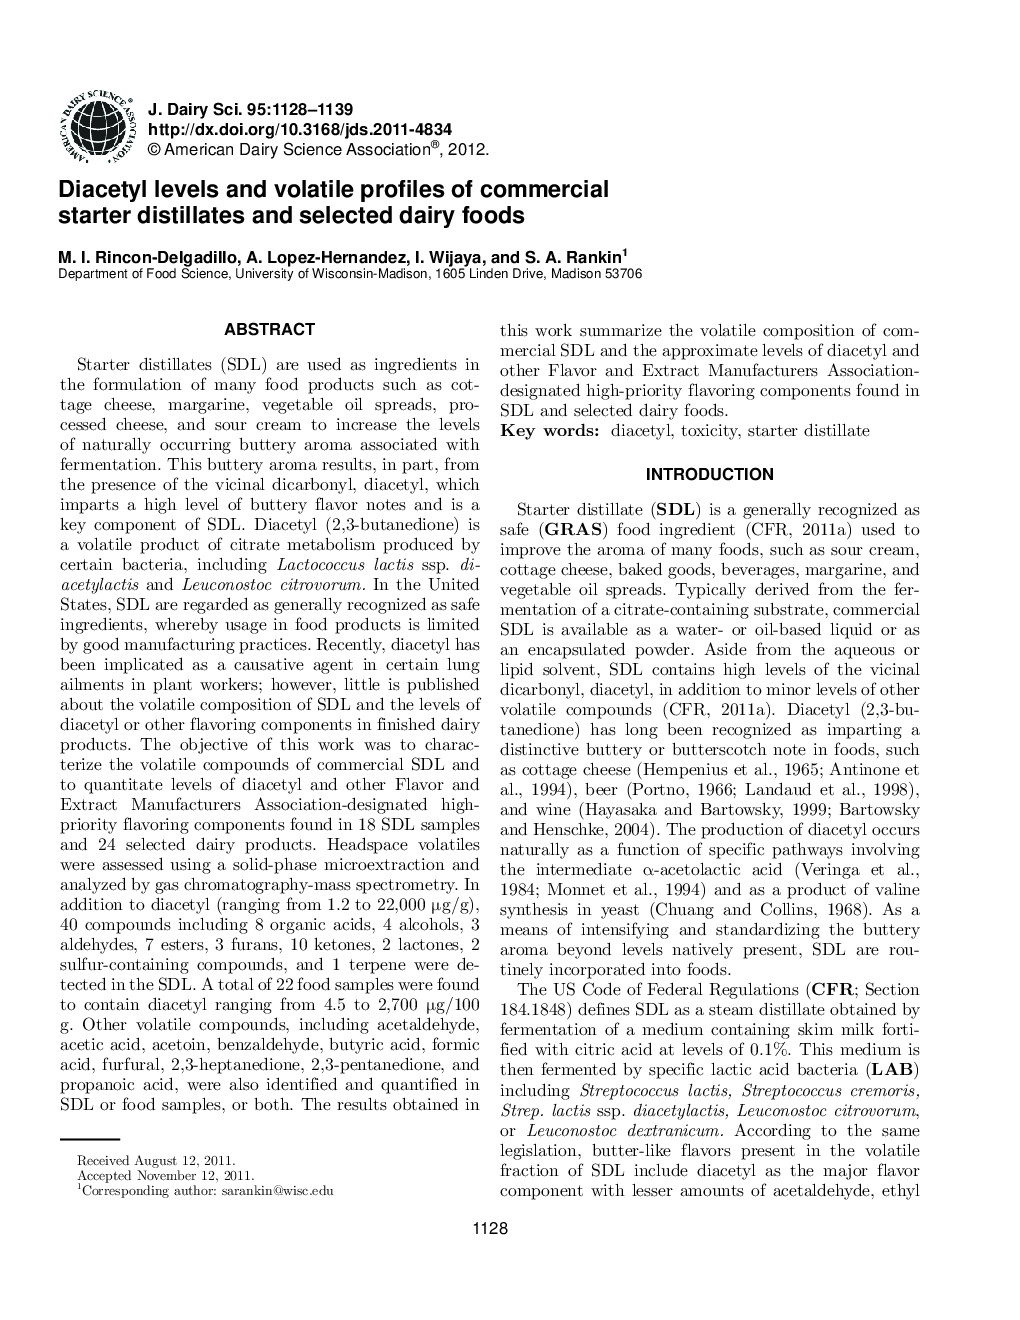 Diacetyl levels and volatile profiles of commercial starter distillates and selected dairy foods